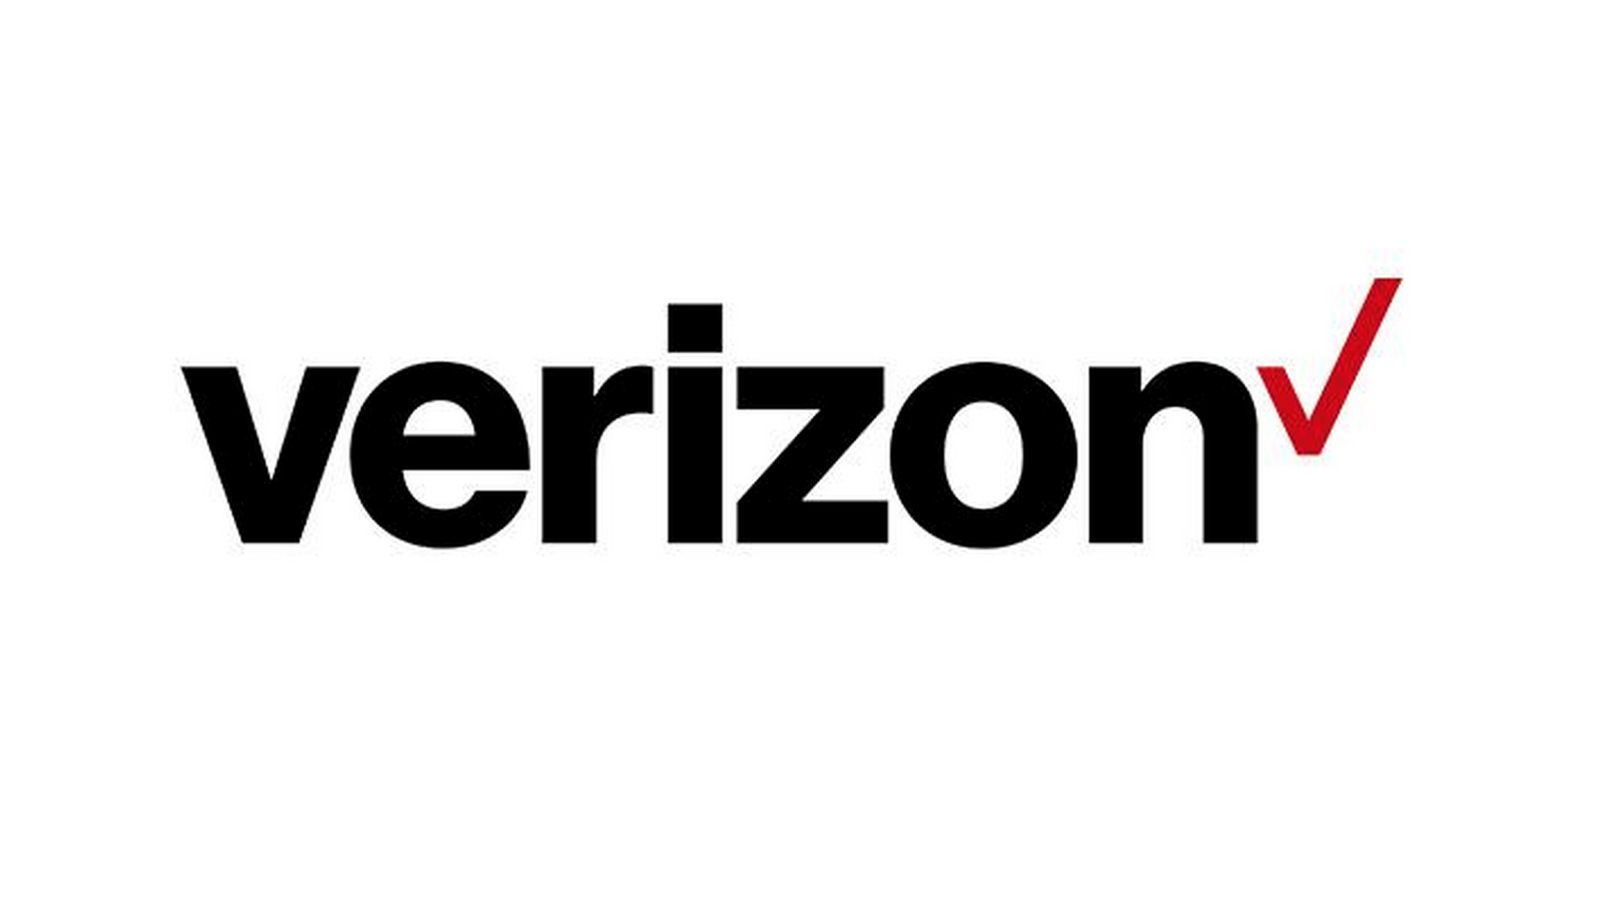 If you had a chance to tell corporate Verizon something, what would you say?